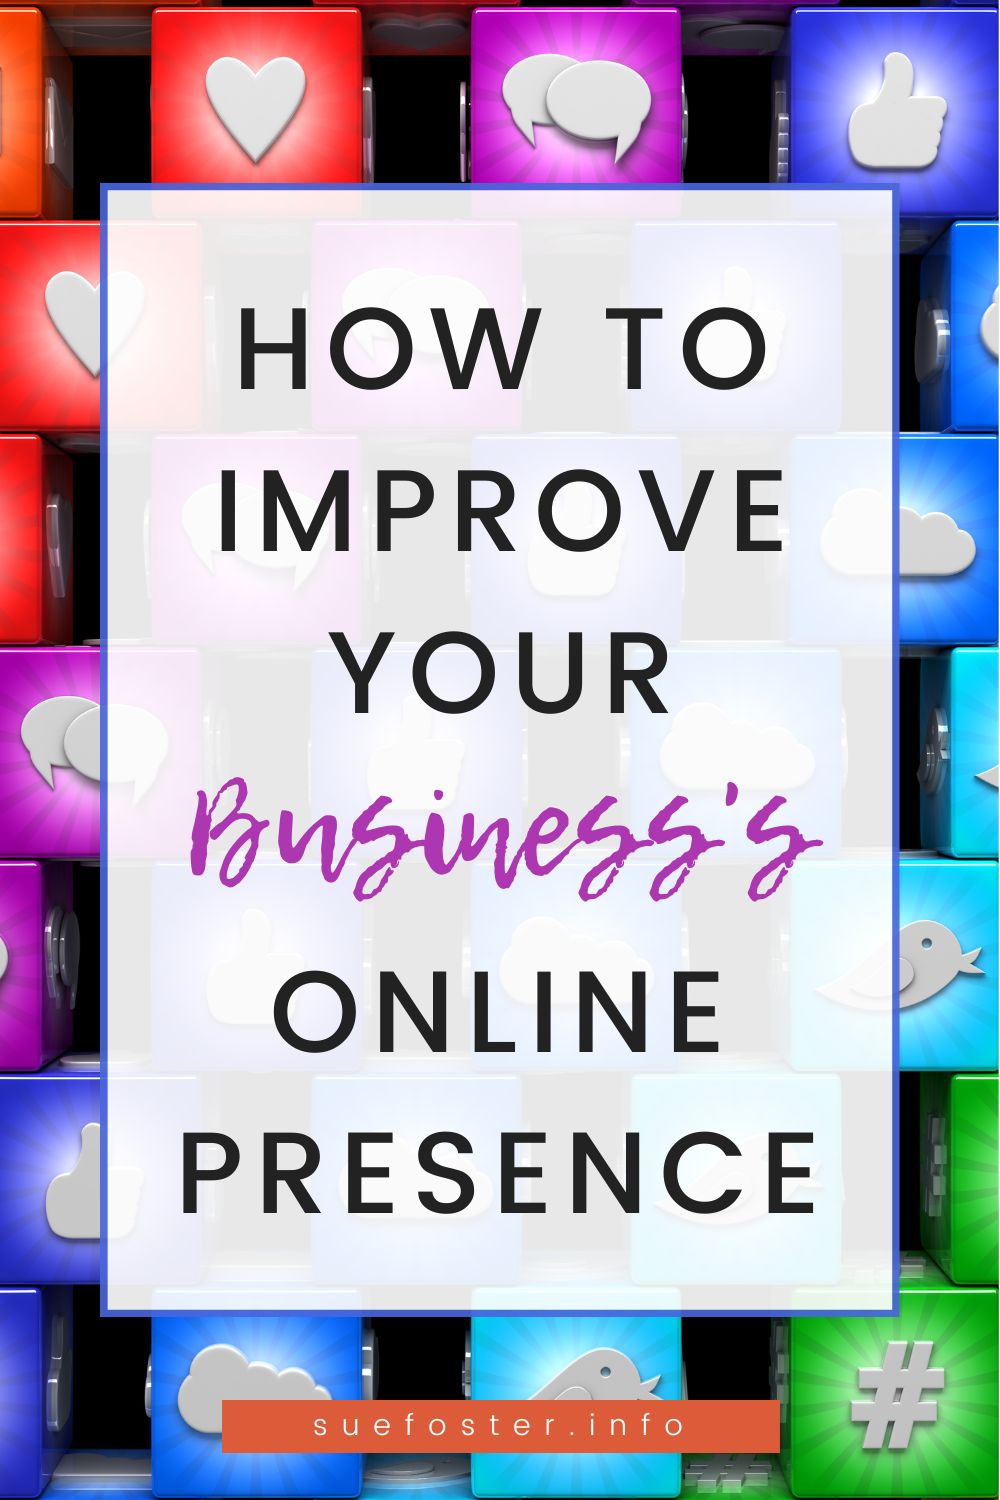 A lot of businesses nowadays are moving or building their presence online because frankly, that’s where the money is. Follow these tips on improving your online presence.